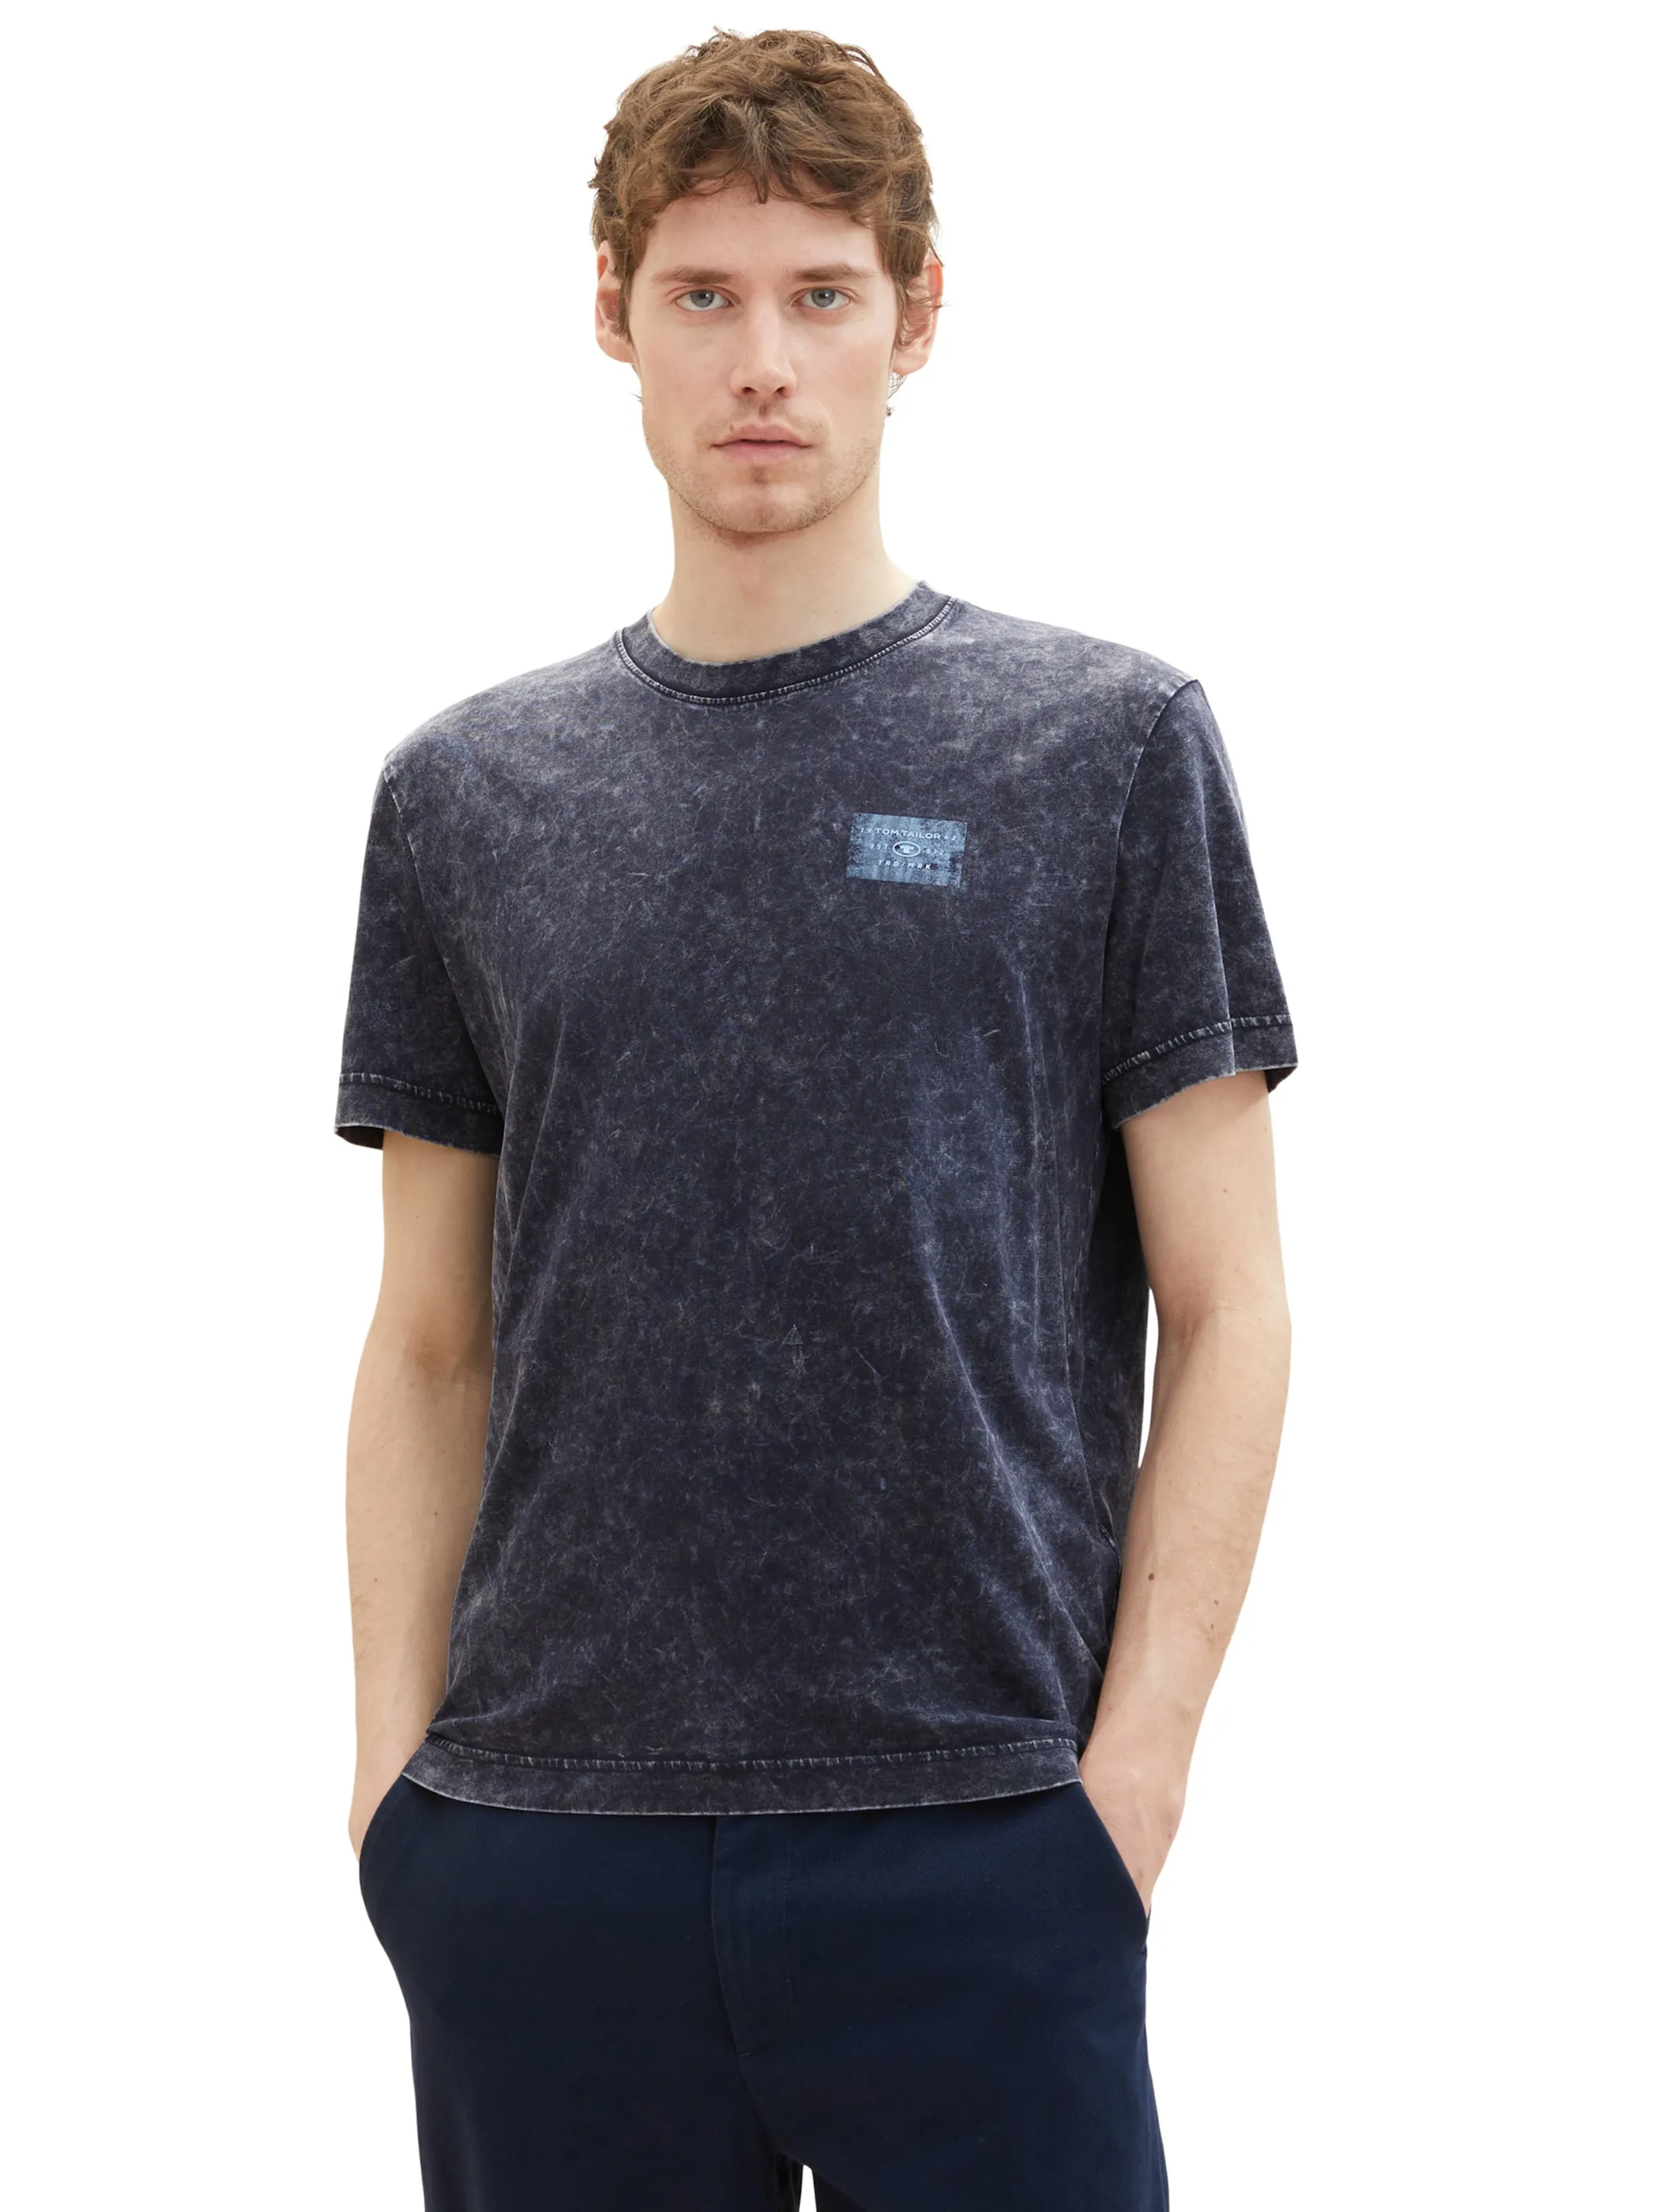 Tom Tailor 1036431 washed t-shirt with print Blau 880536 10668 4